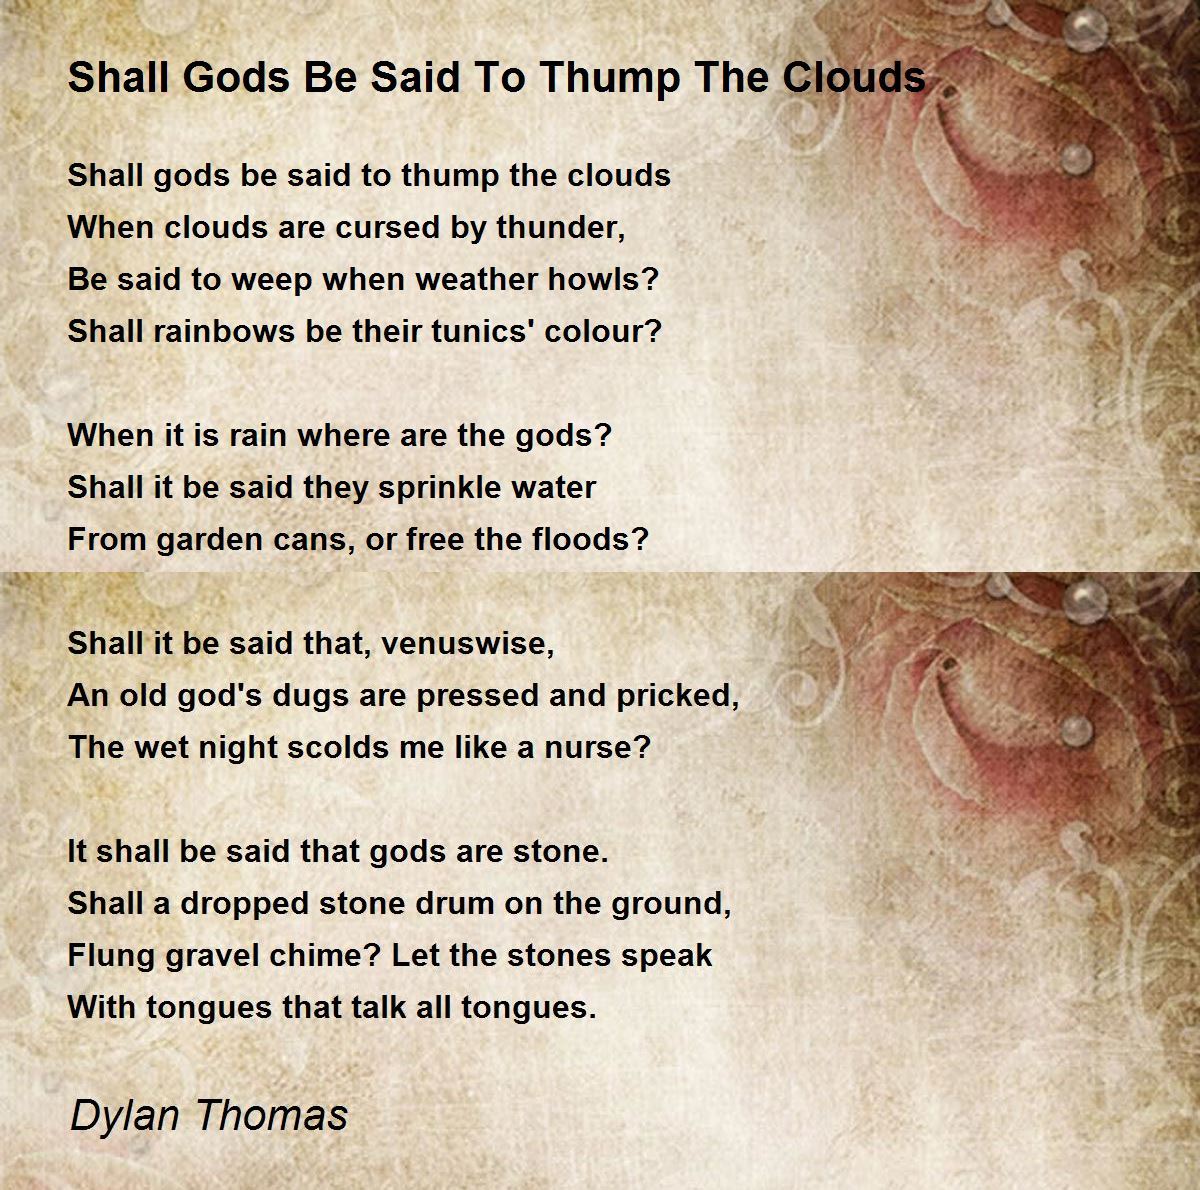 shall gods be said to thump the clouds